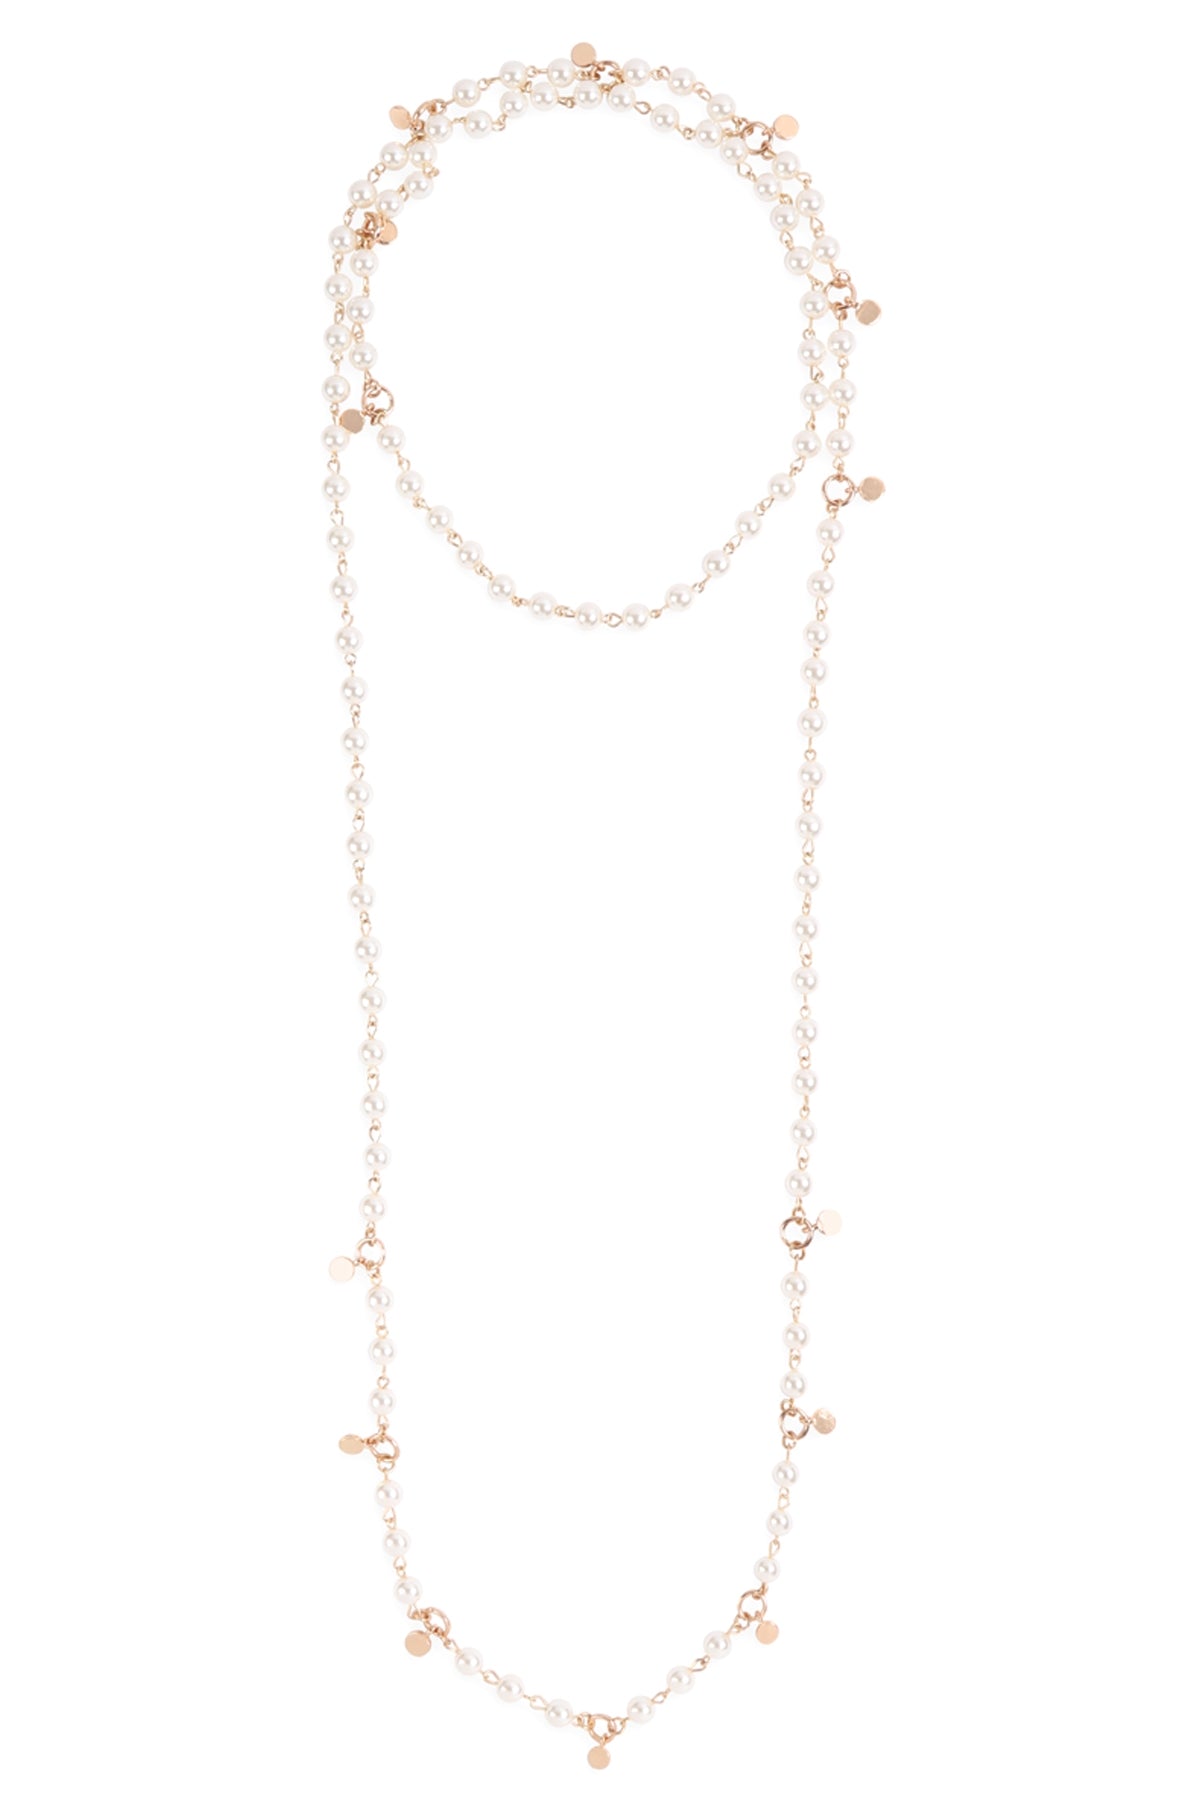 ACRYLIC PEARL LONG NECKLACE